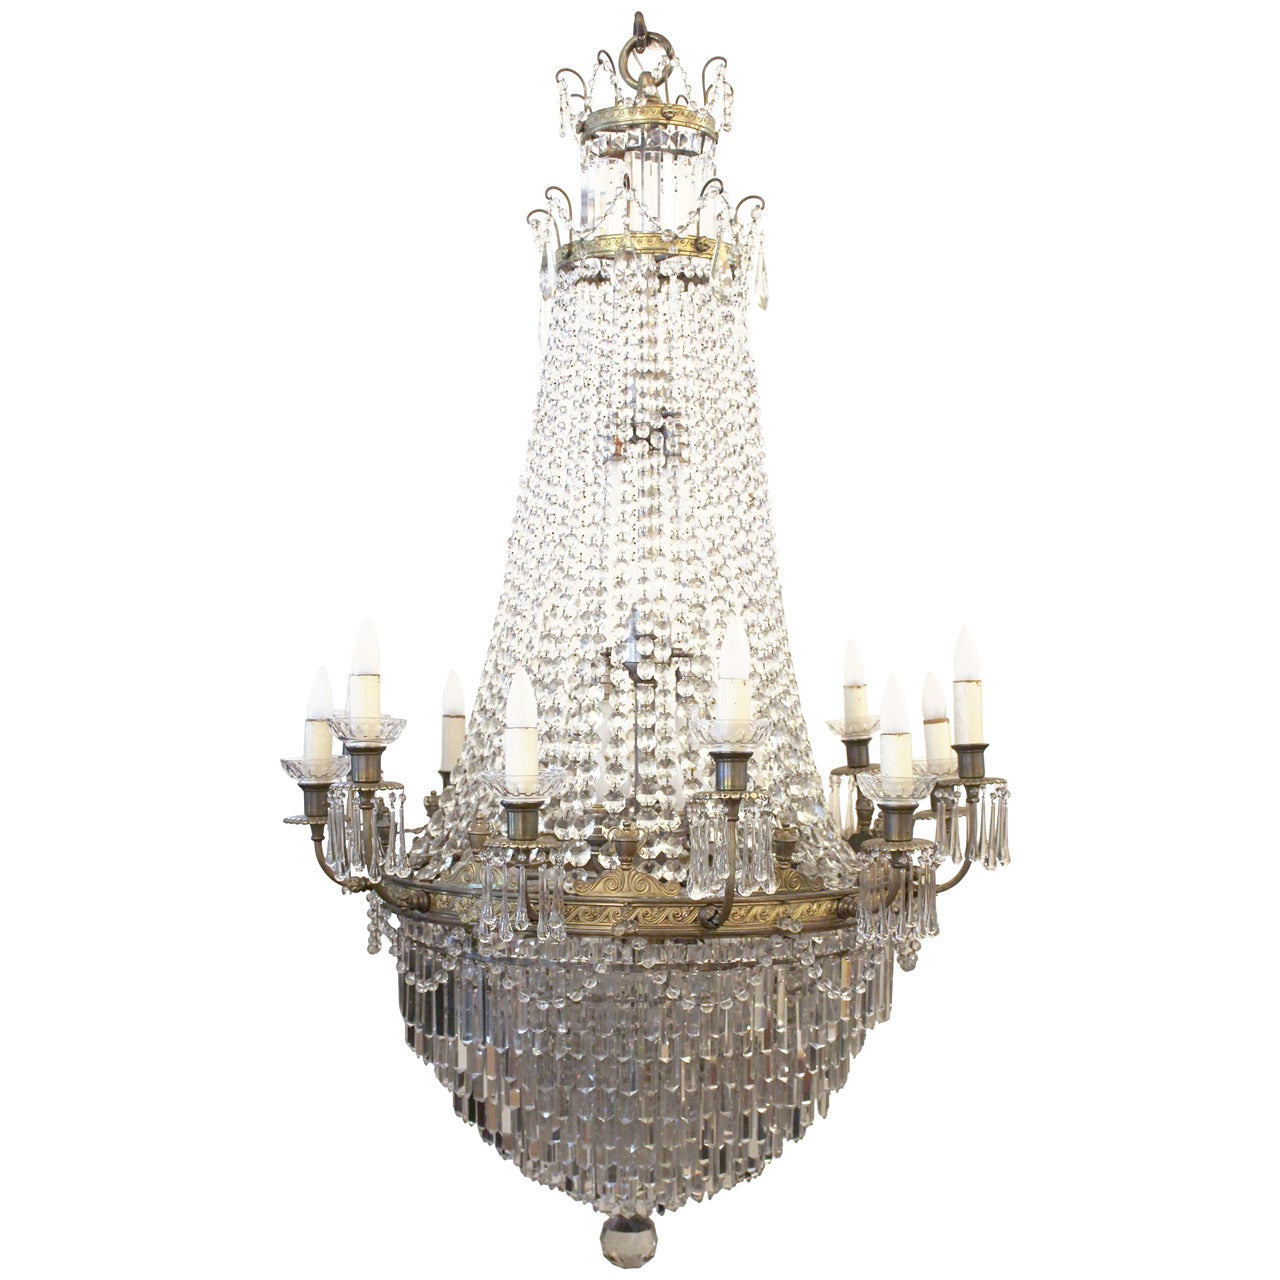 1927 Large Louis XVI Style Crystal Chandelier with 12 Tiers; Original Crystals